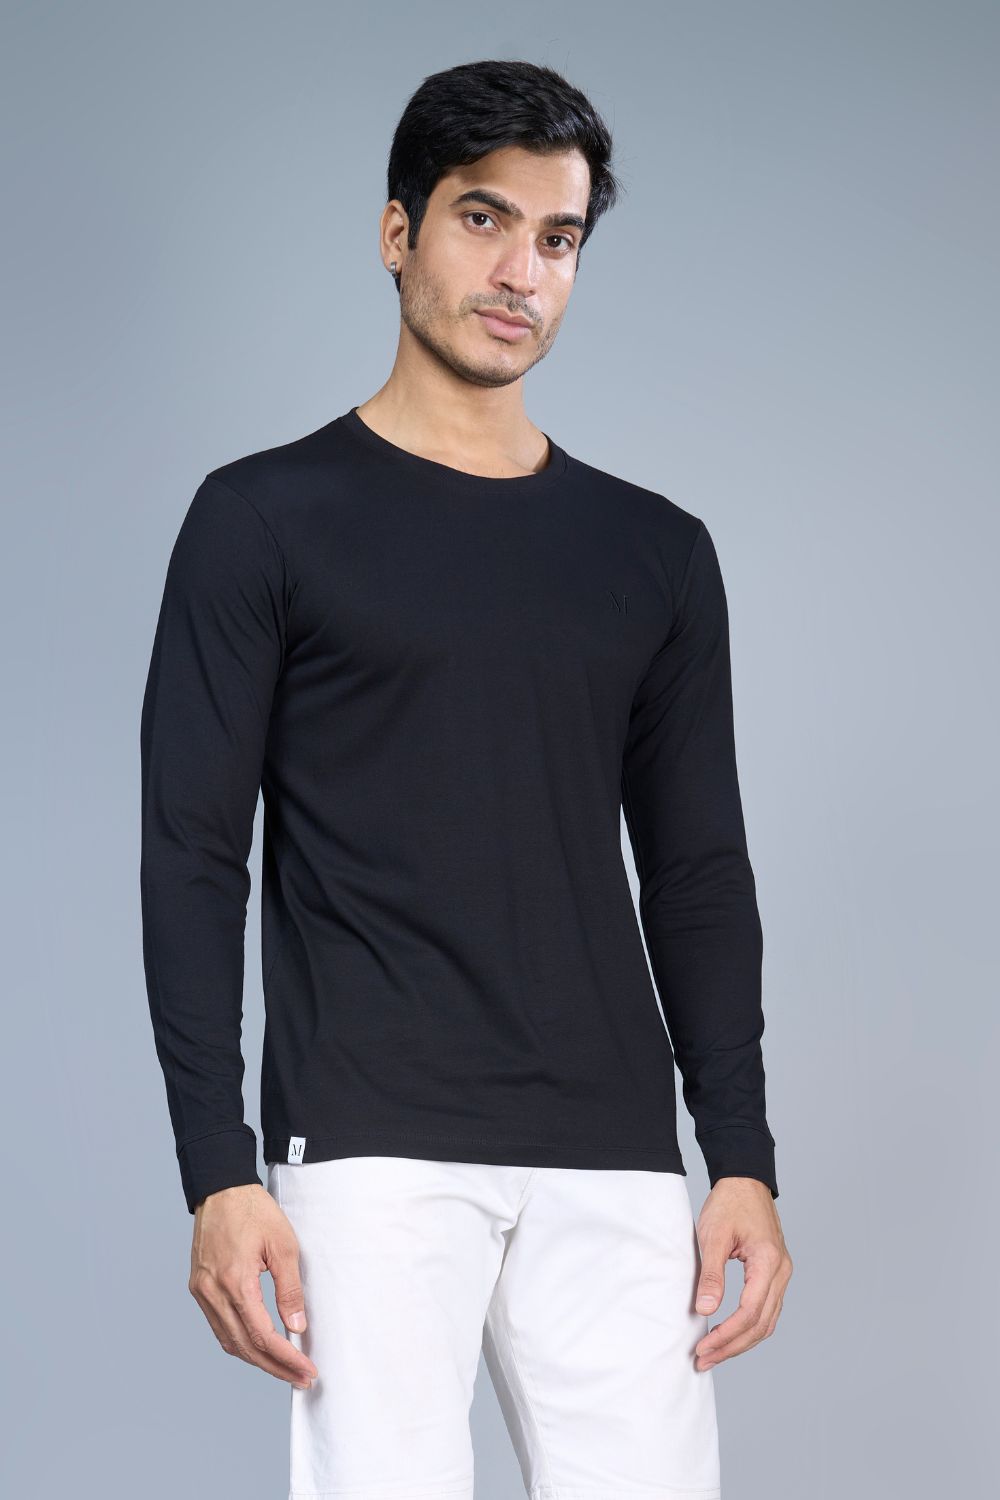 Black colored, full sleeve solid T shirt for Men with round neck, front view.